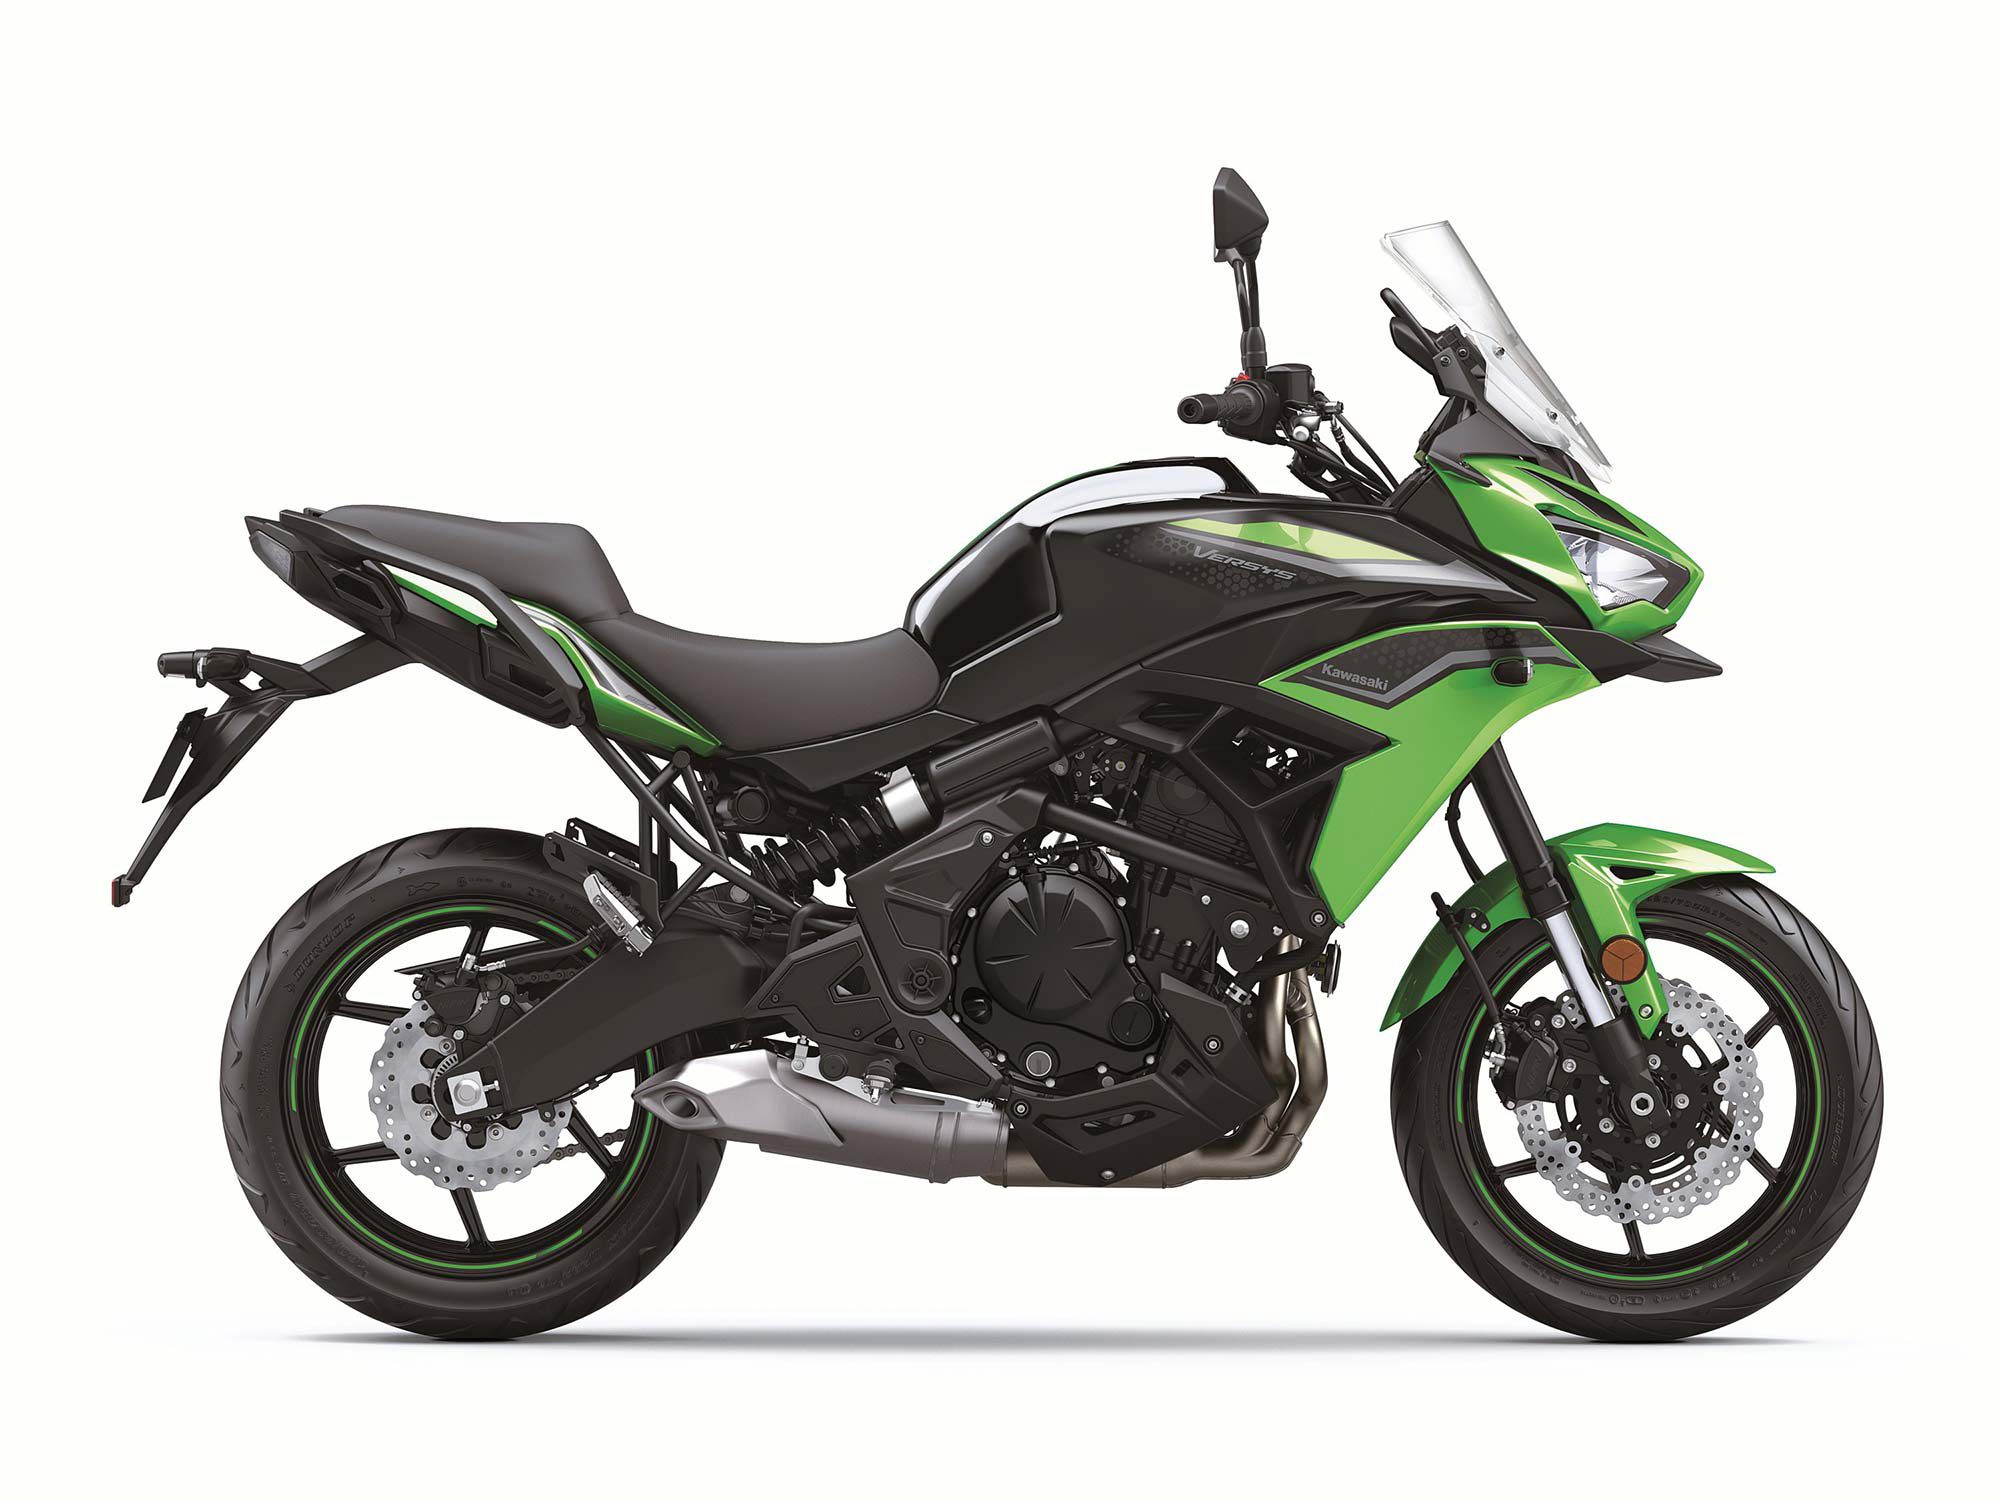 One of the big updates on the 2022 Versys 650 is the addition of traction control.